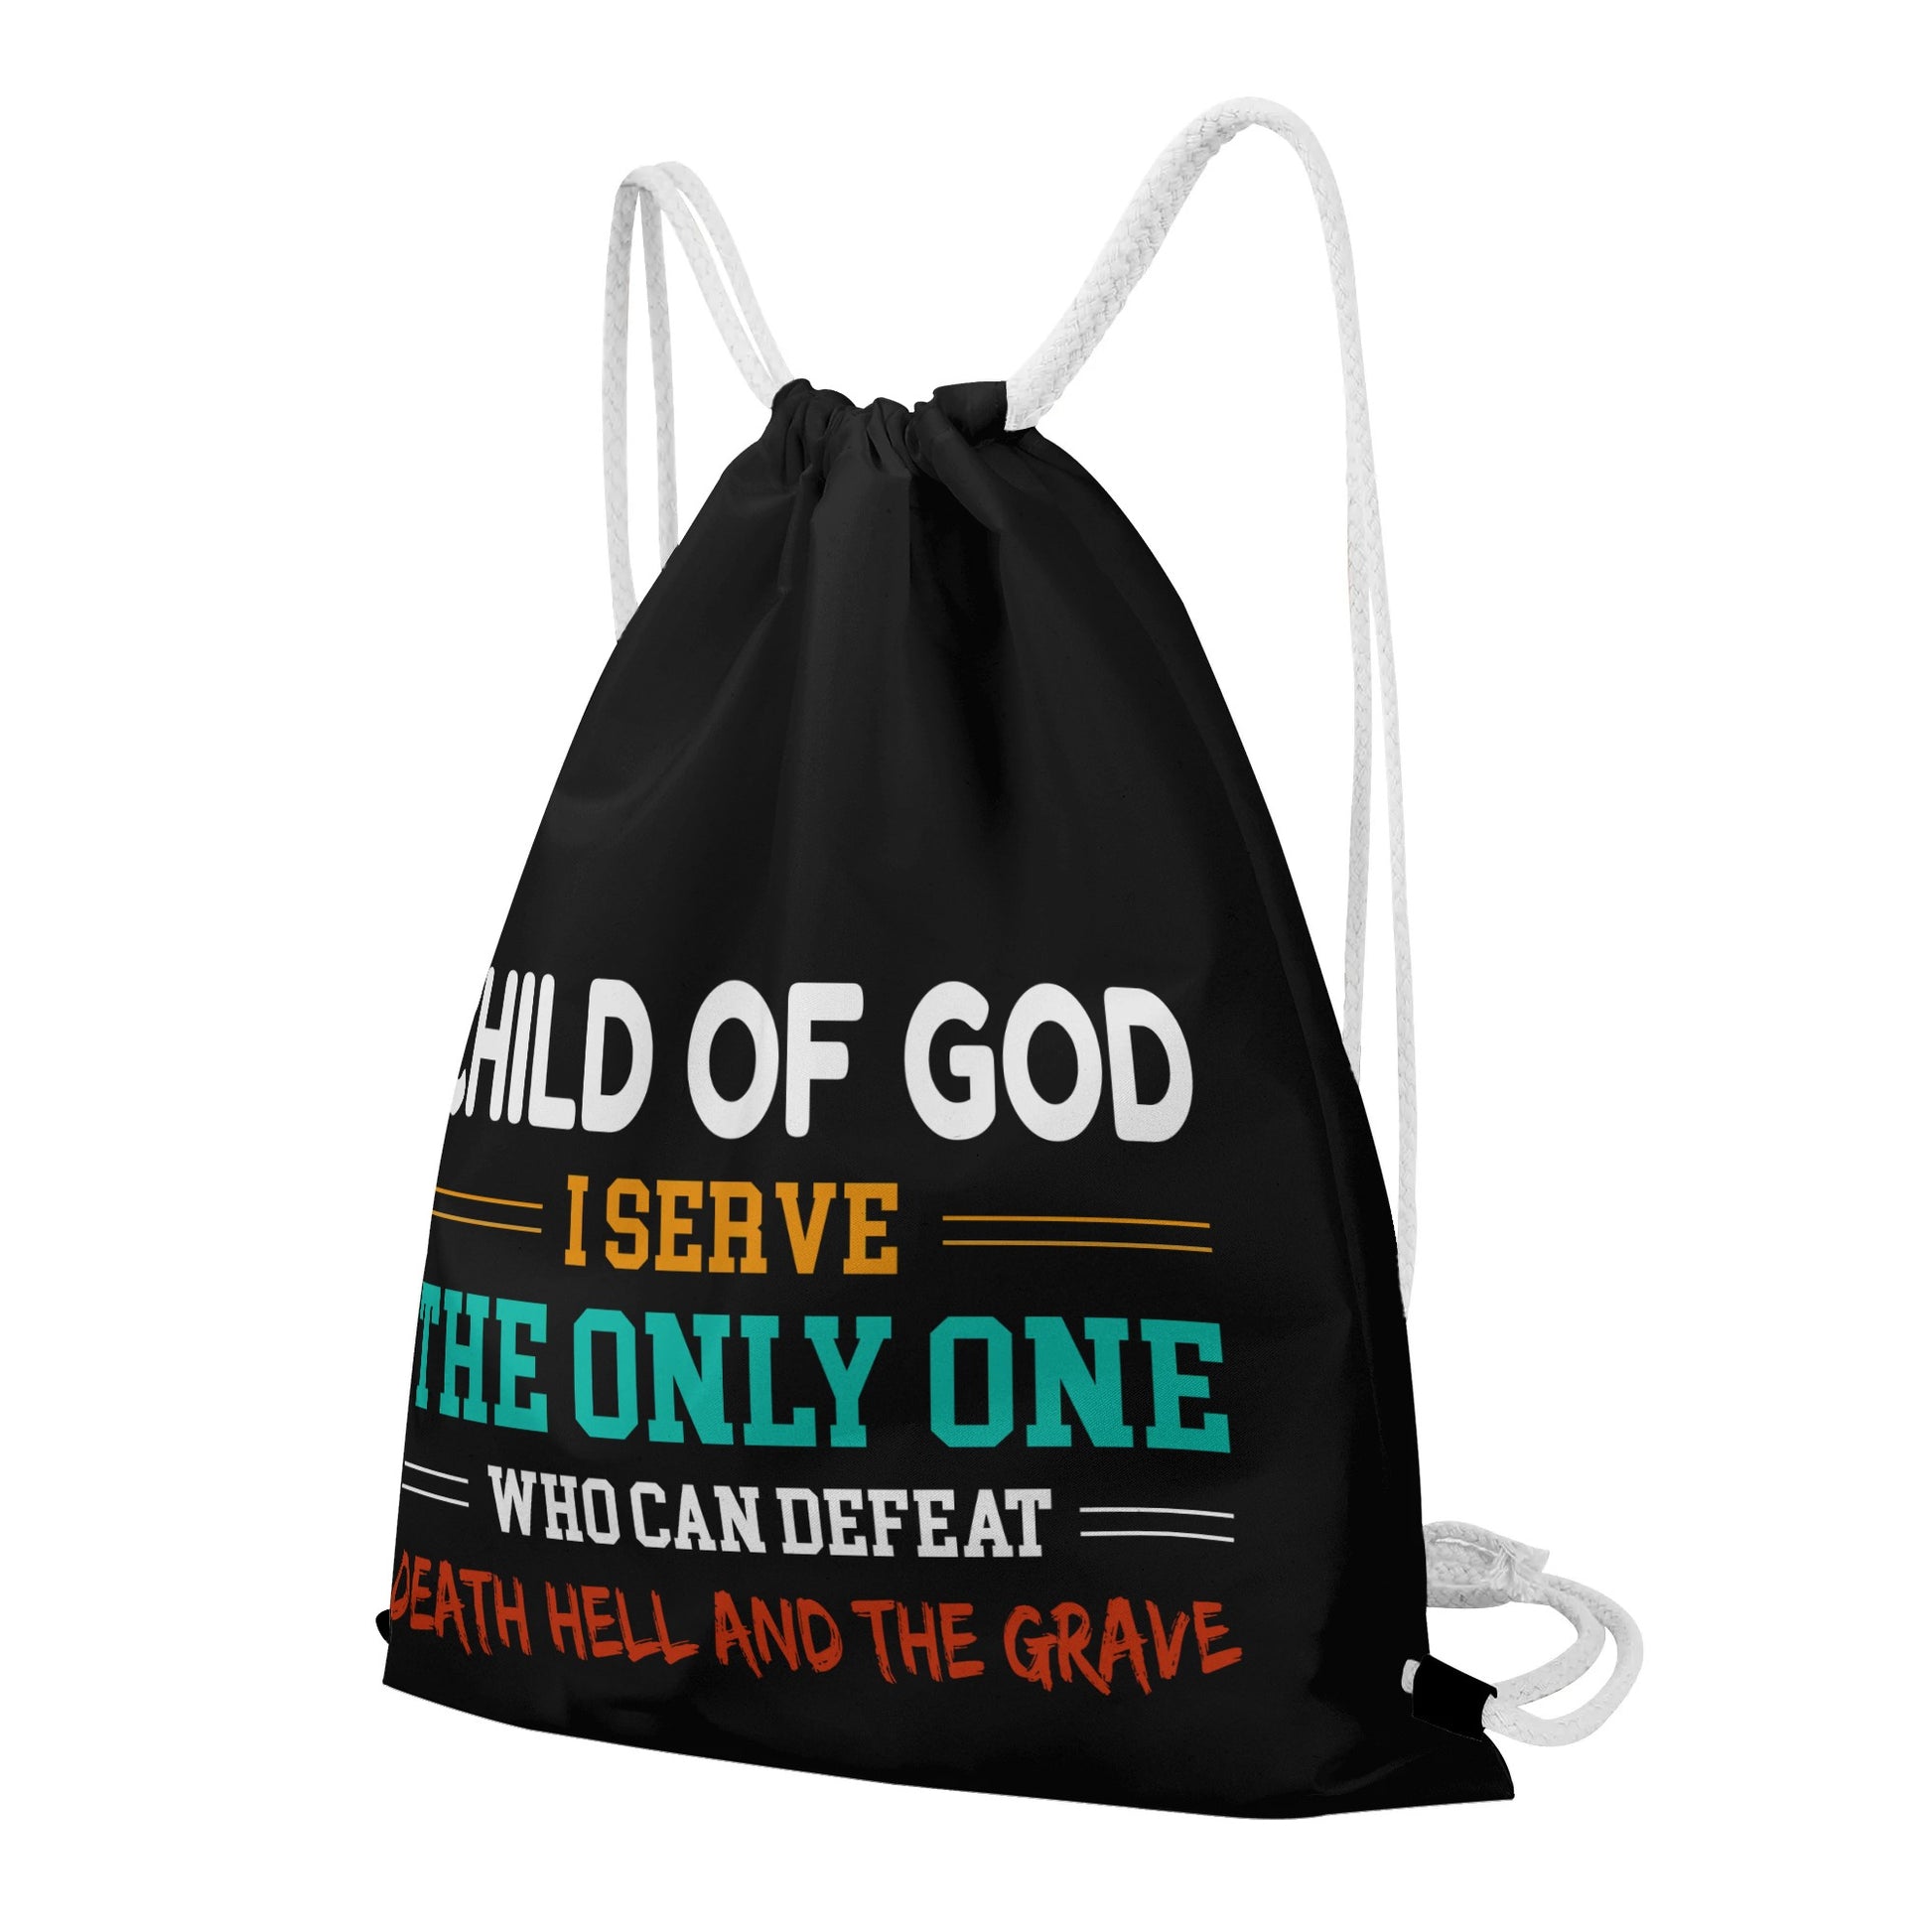 Child Of God I Serve The Only One Who Can Defeat Death Hell And The Grave Gym Drawstring Bag popcustoms